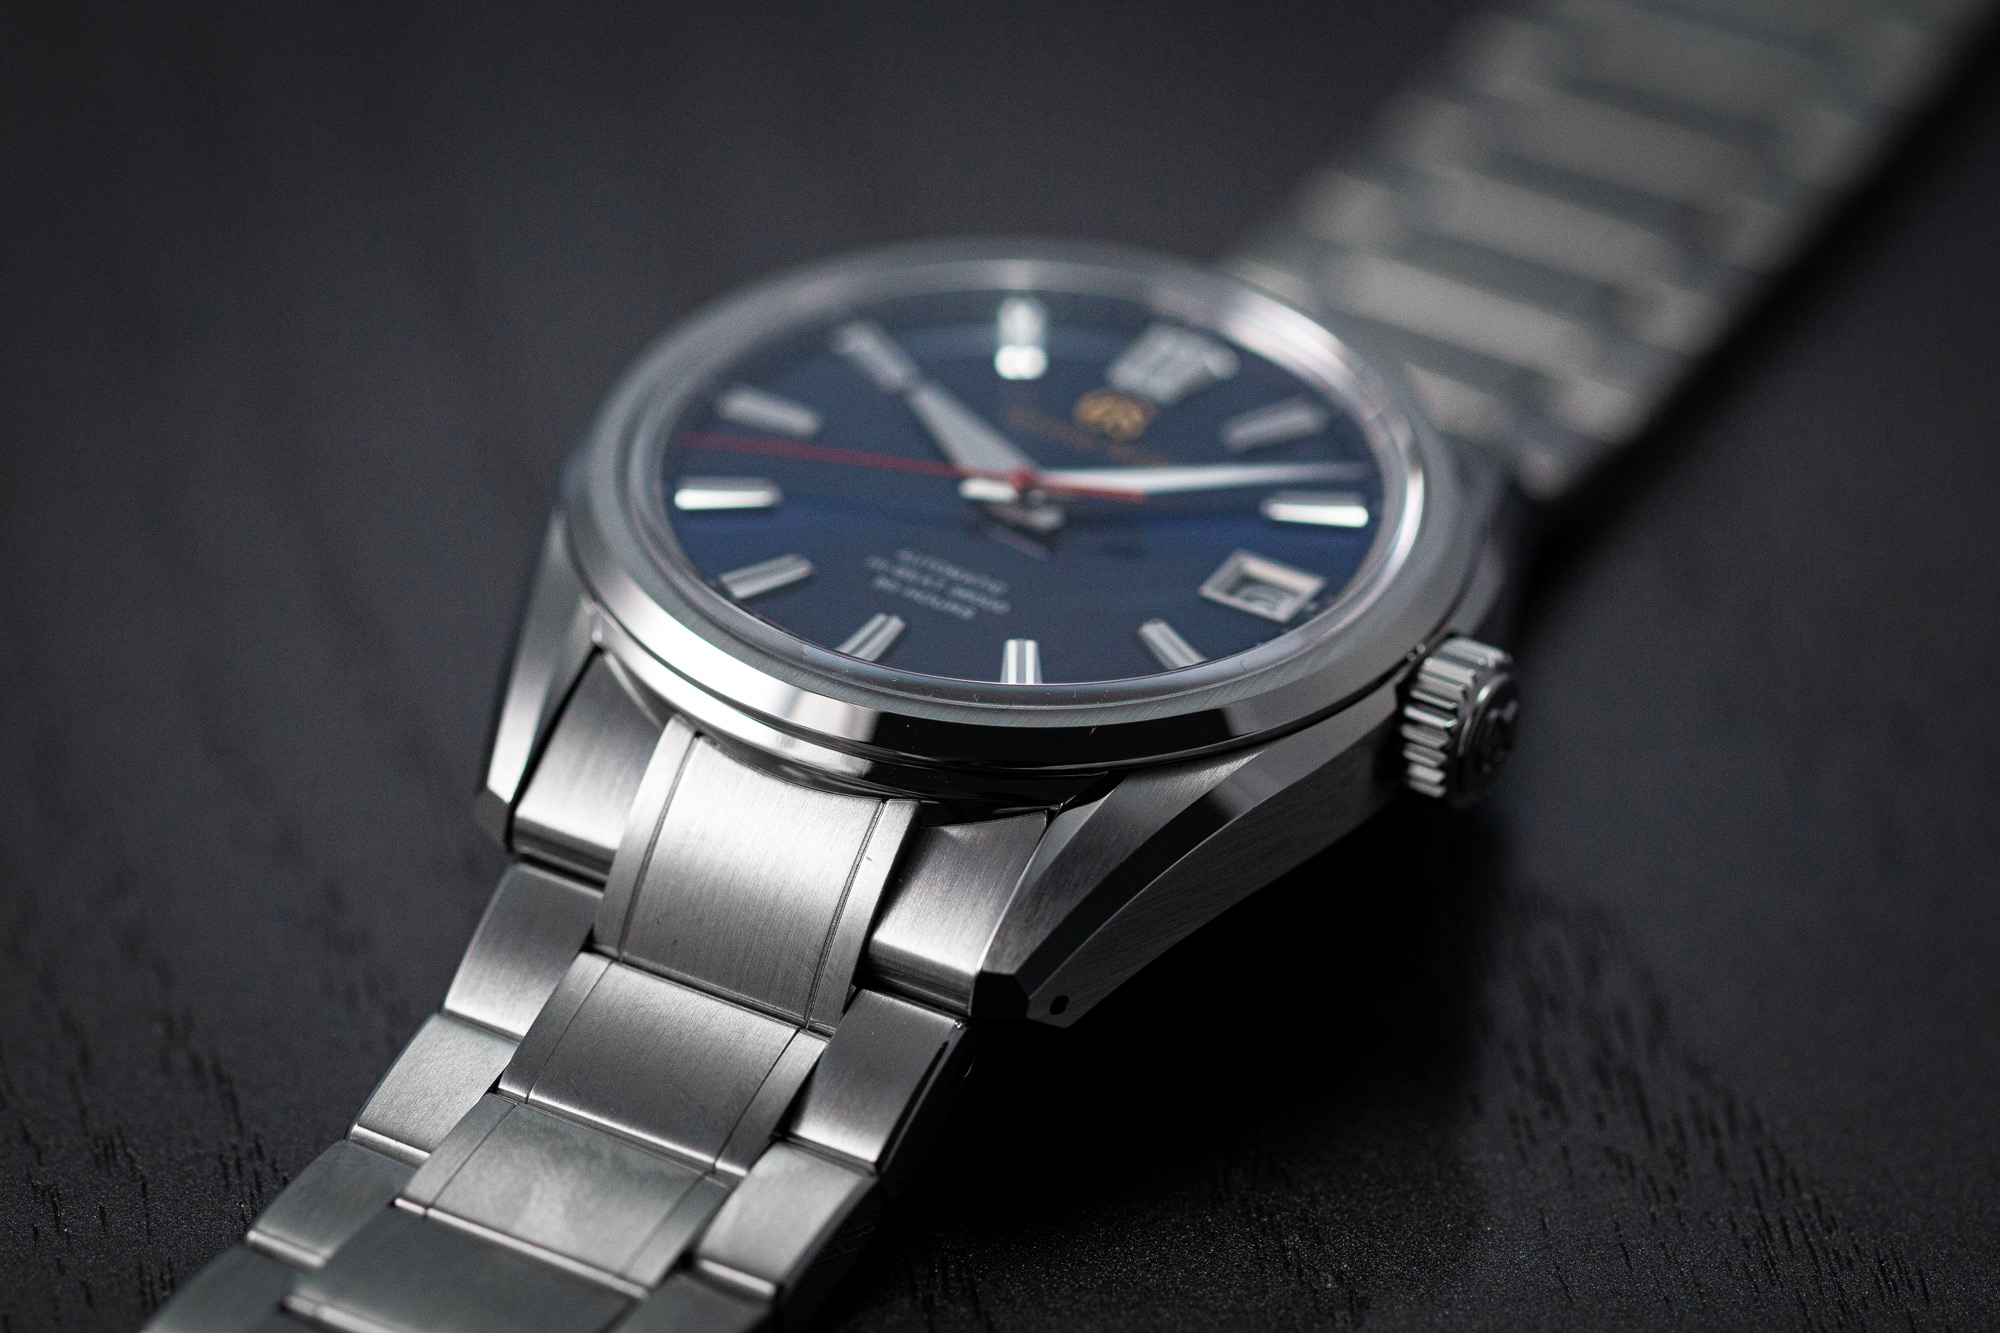 Grand Seiko SLGH003 wristwatch with a blue dial and red accents on a tabletop.